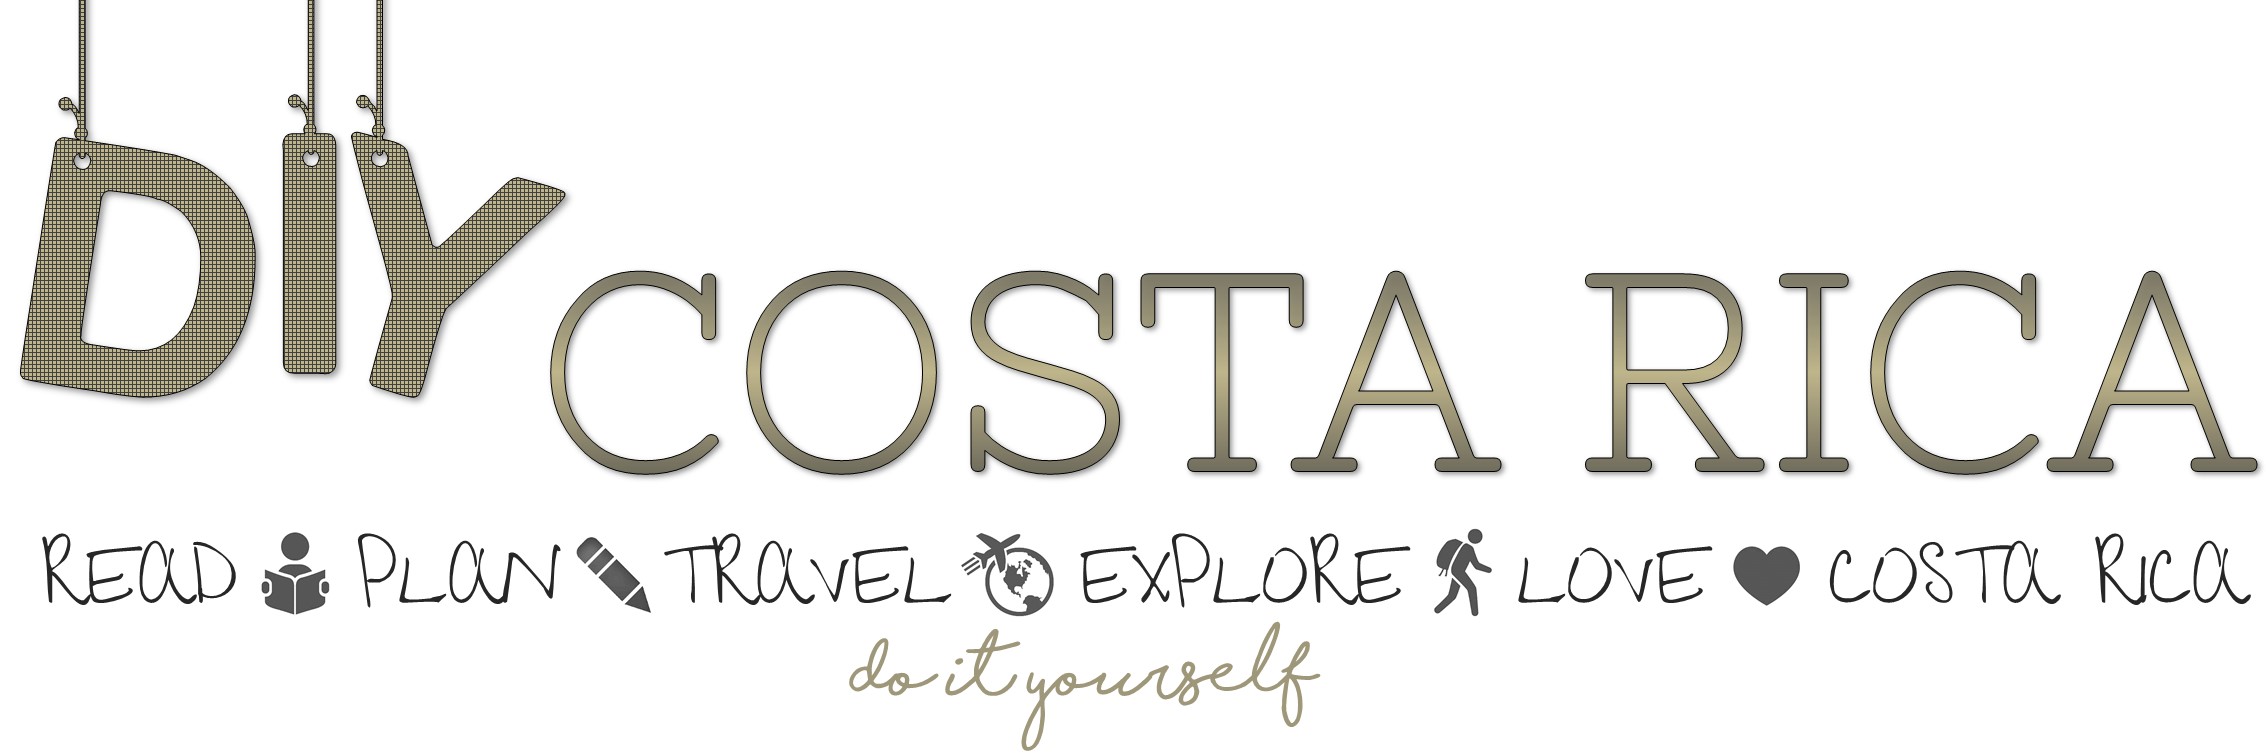 How Is DIY Costa Rica Different From The Costa Rica Travel Blog?